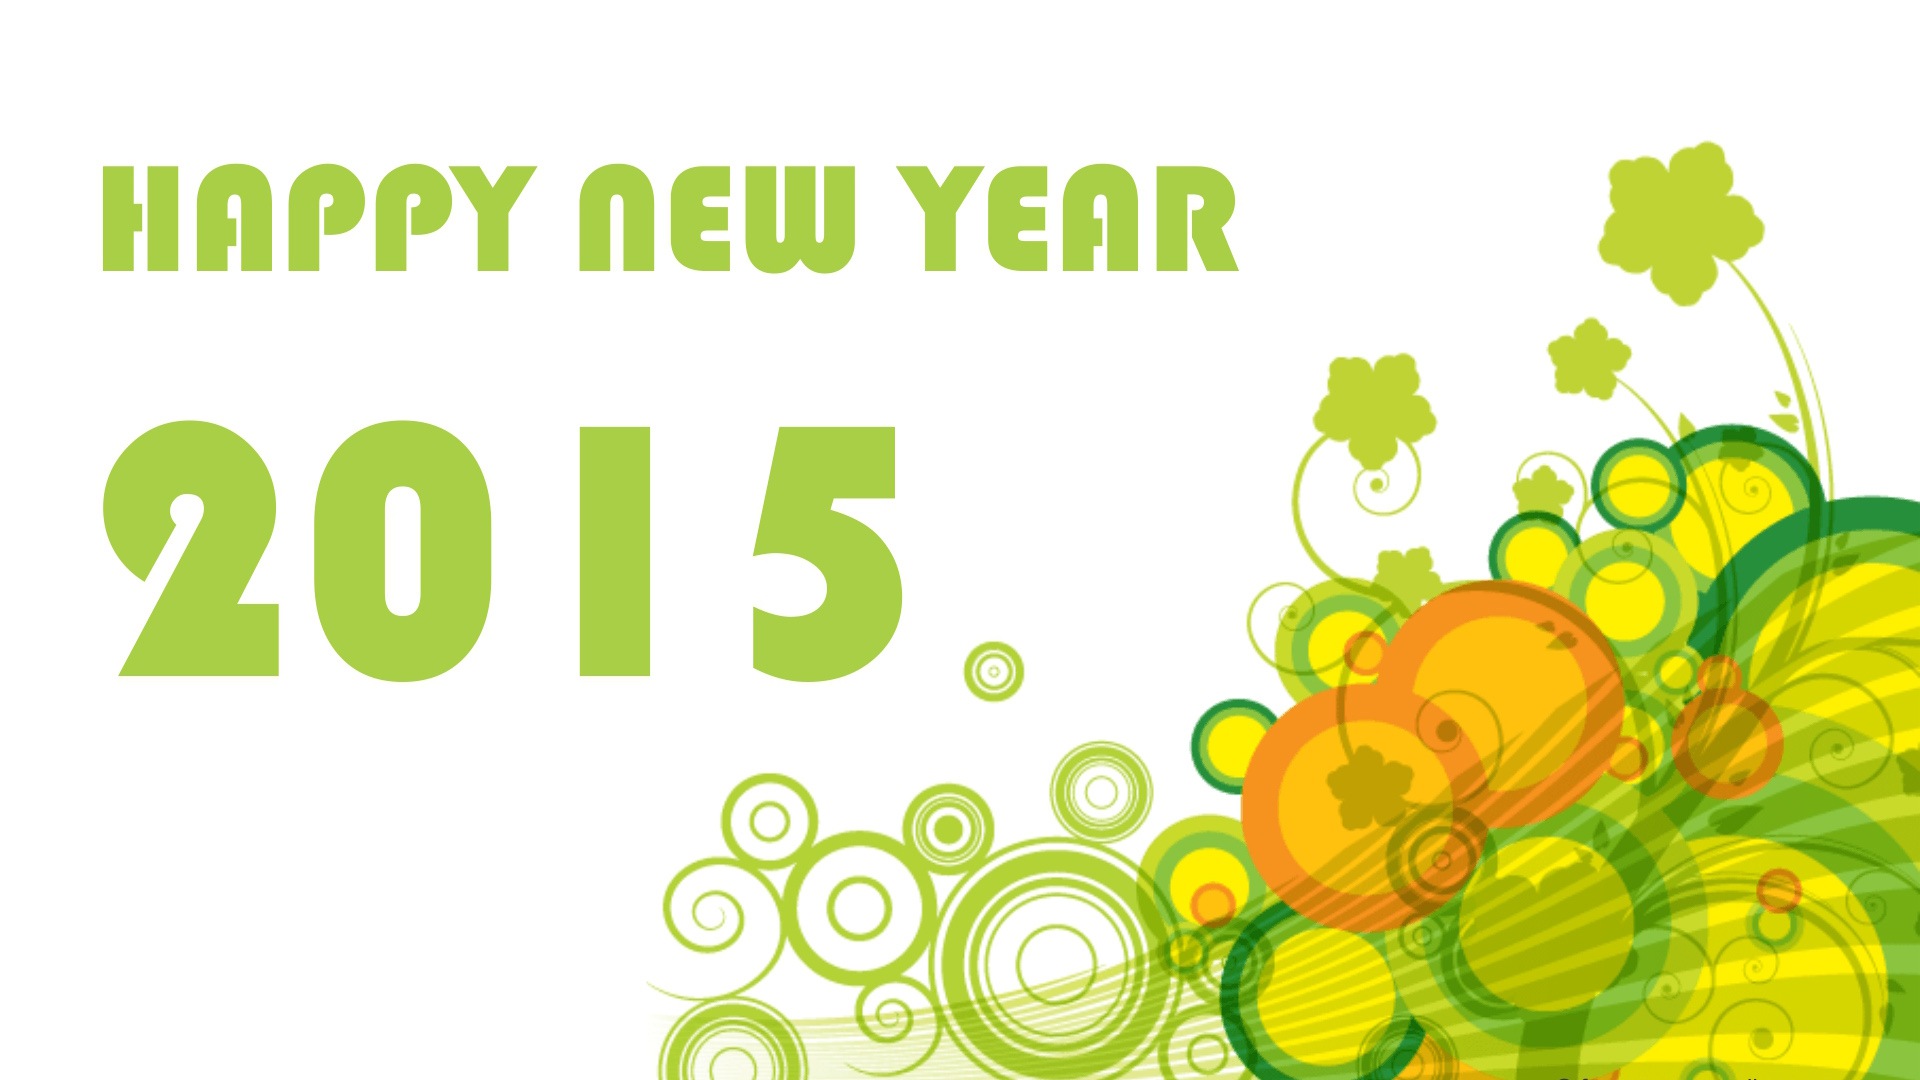 2015 New Year theme HD wallpapers (1) #10 - 1920x1080